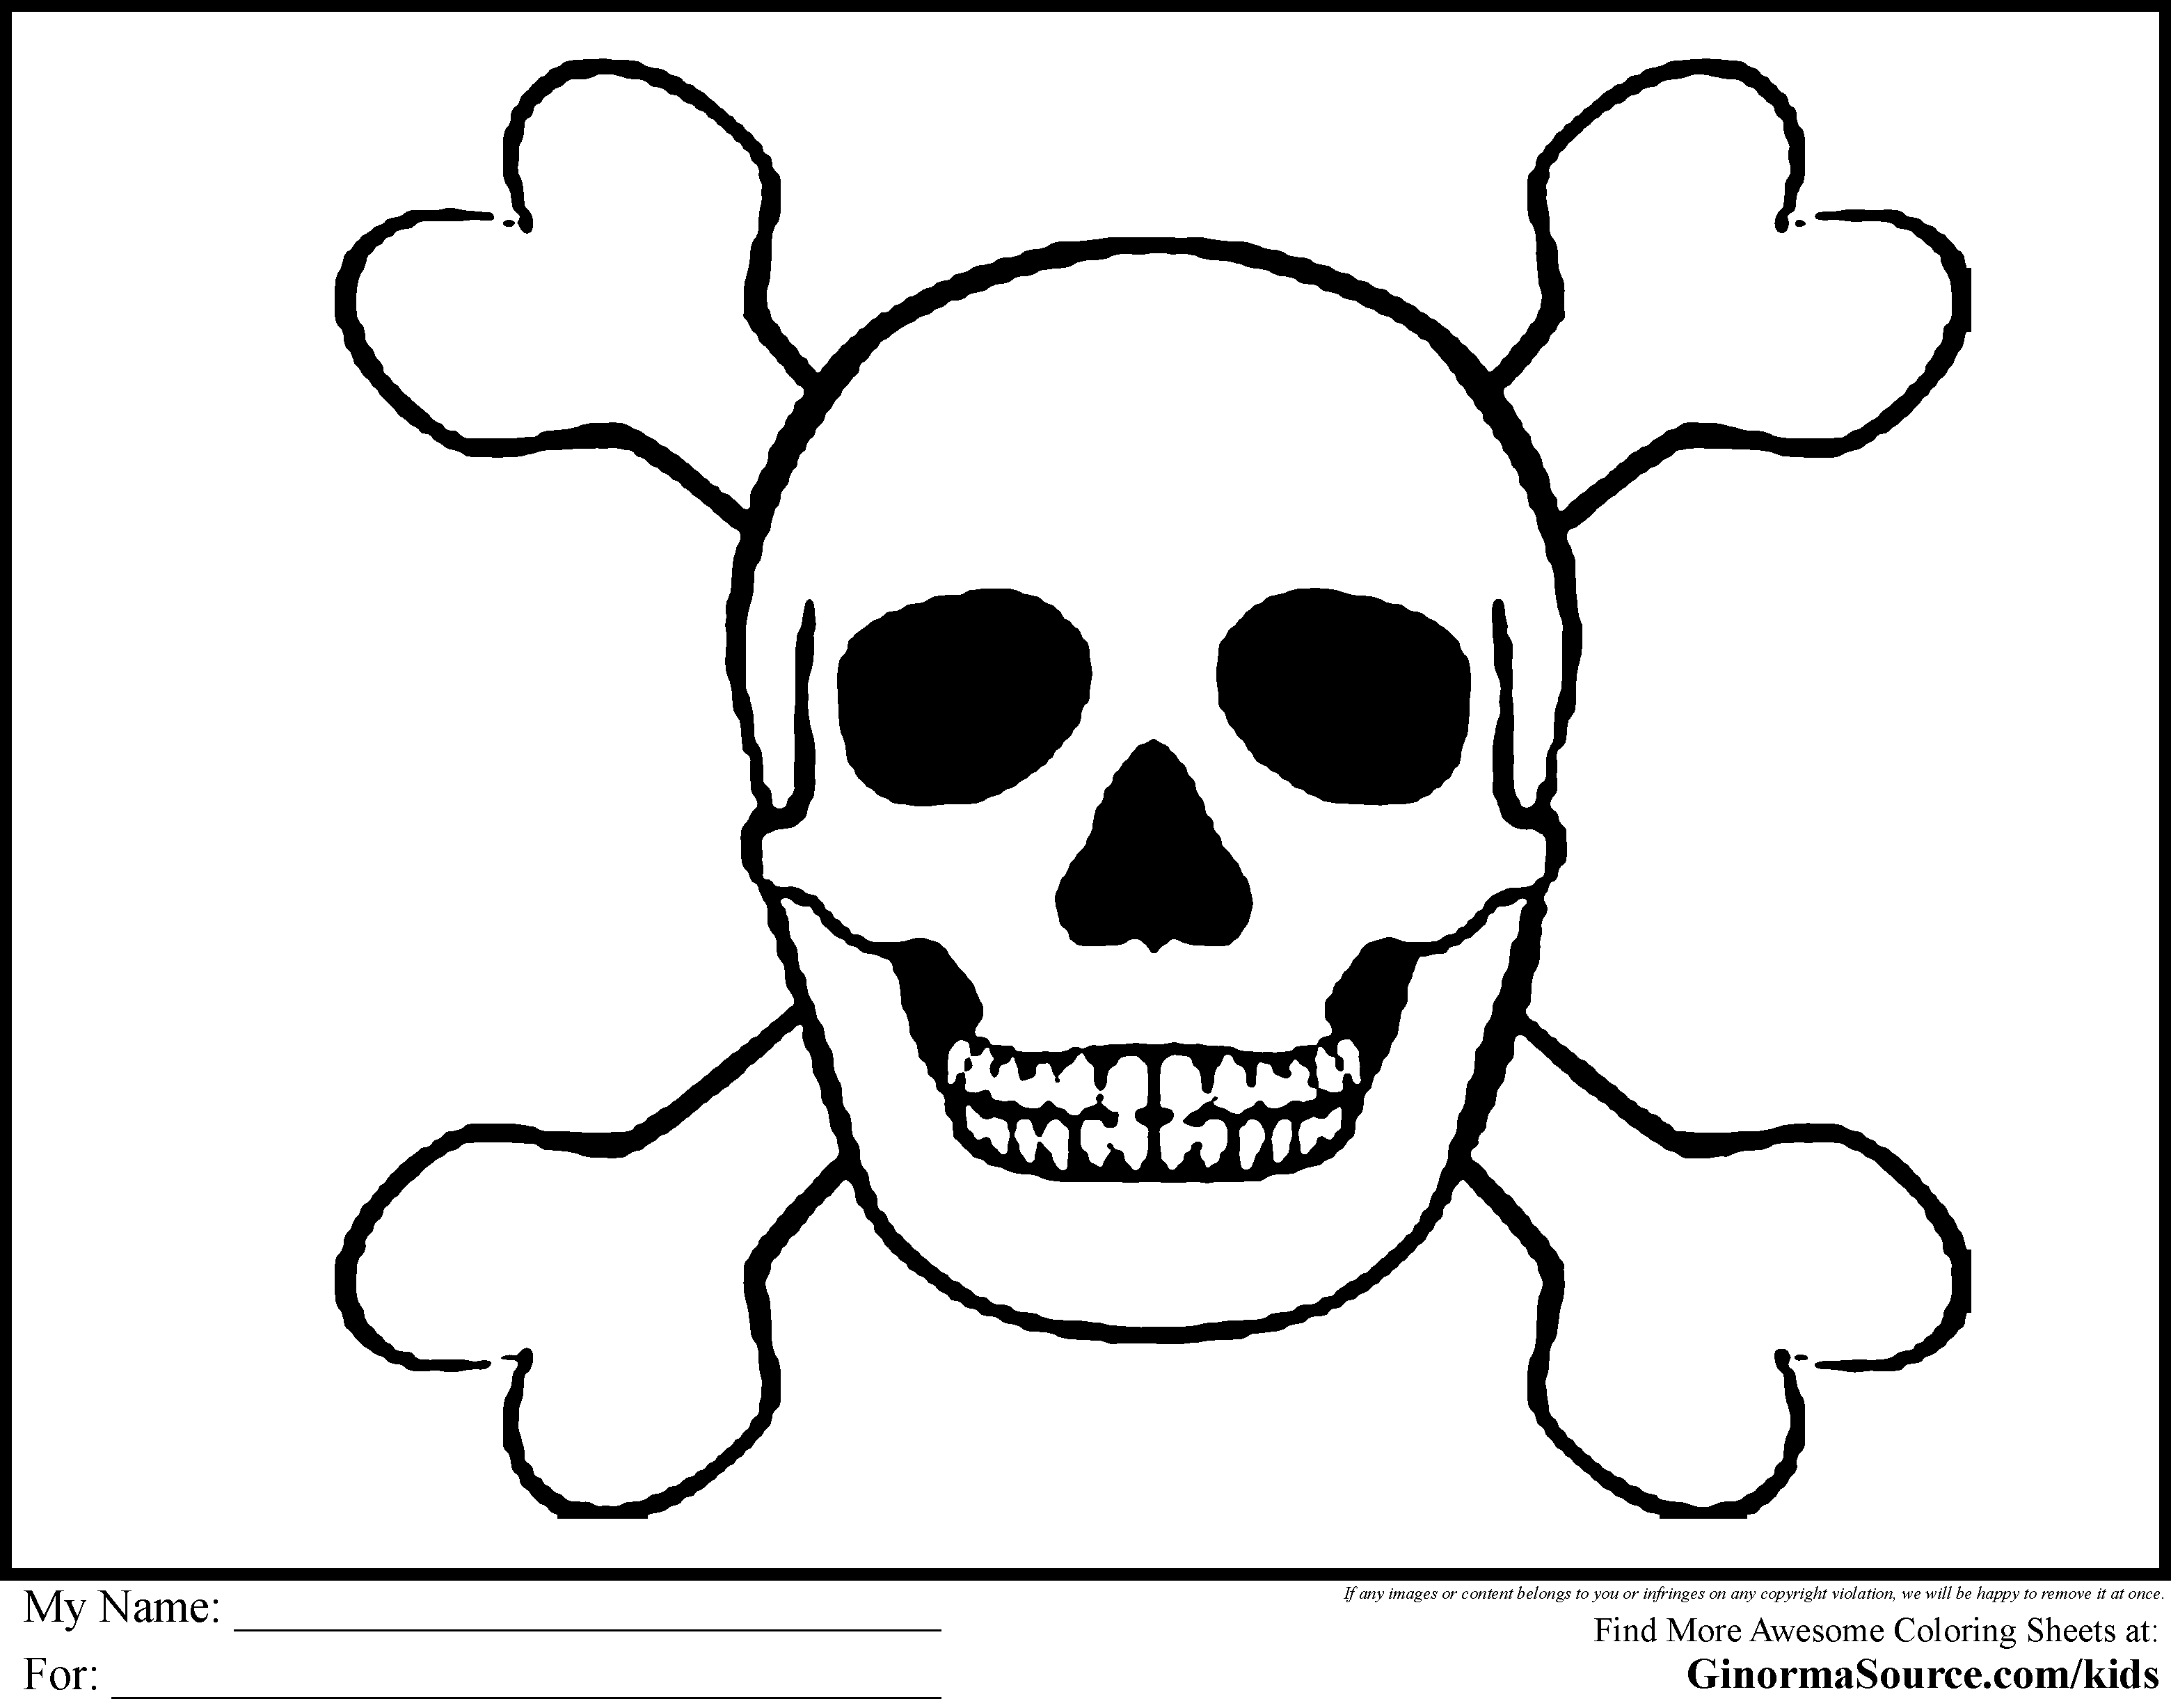 Pirate Skull Drawings: Pirate Drawings, Pirate Skull and ...